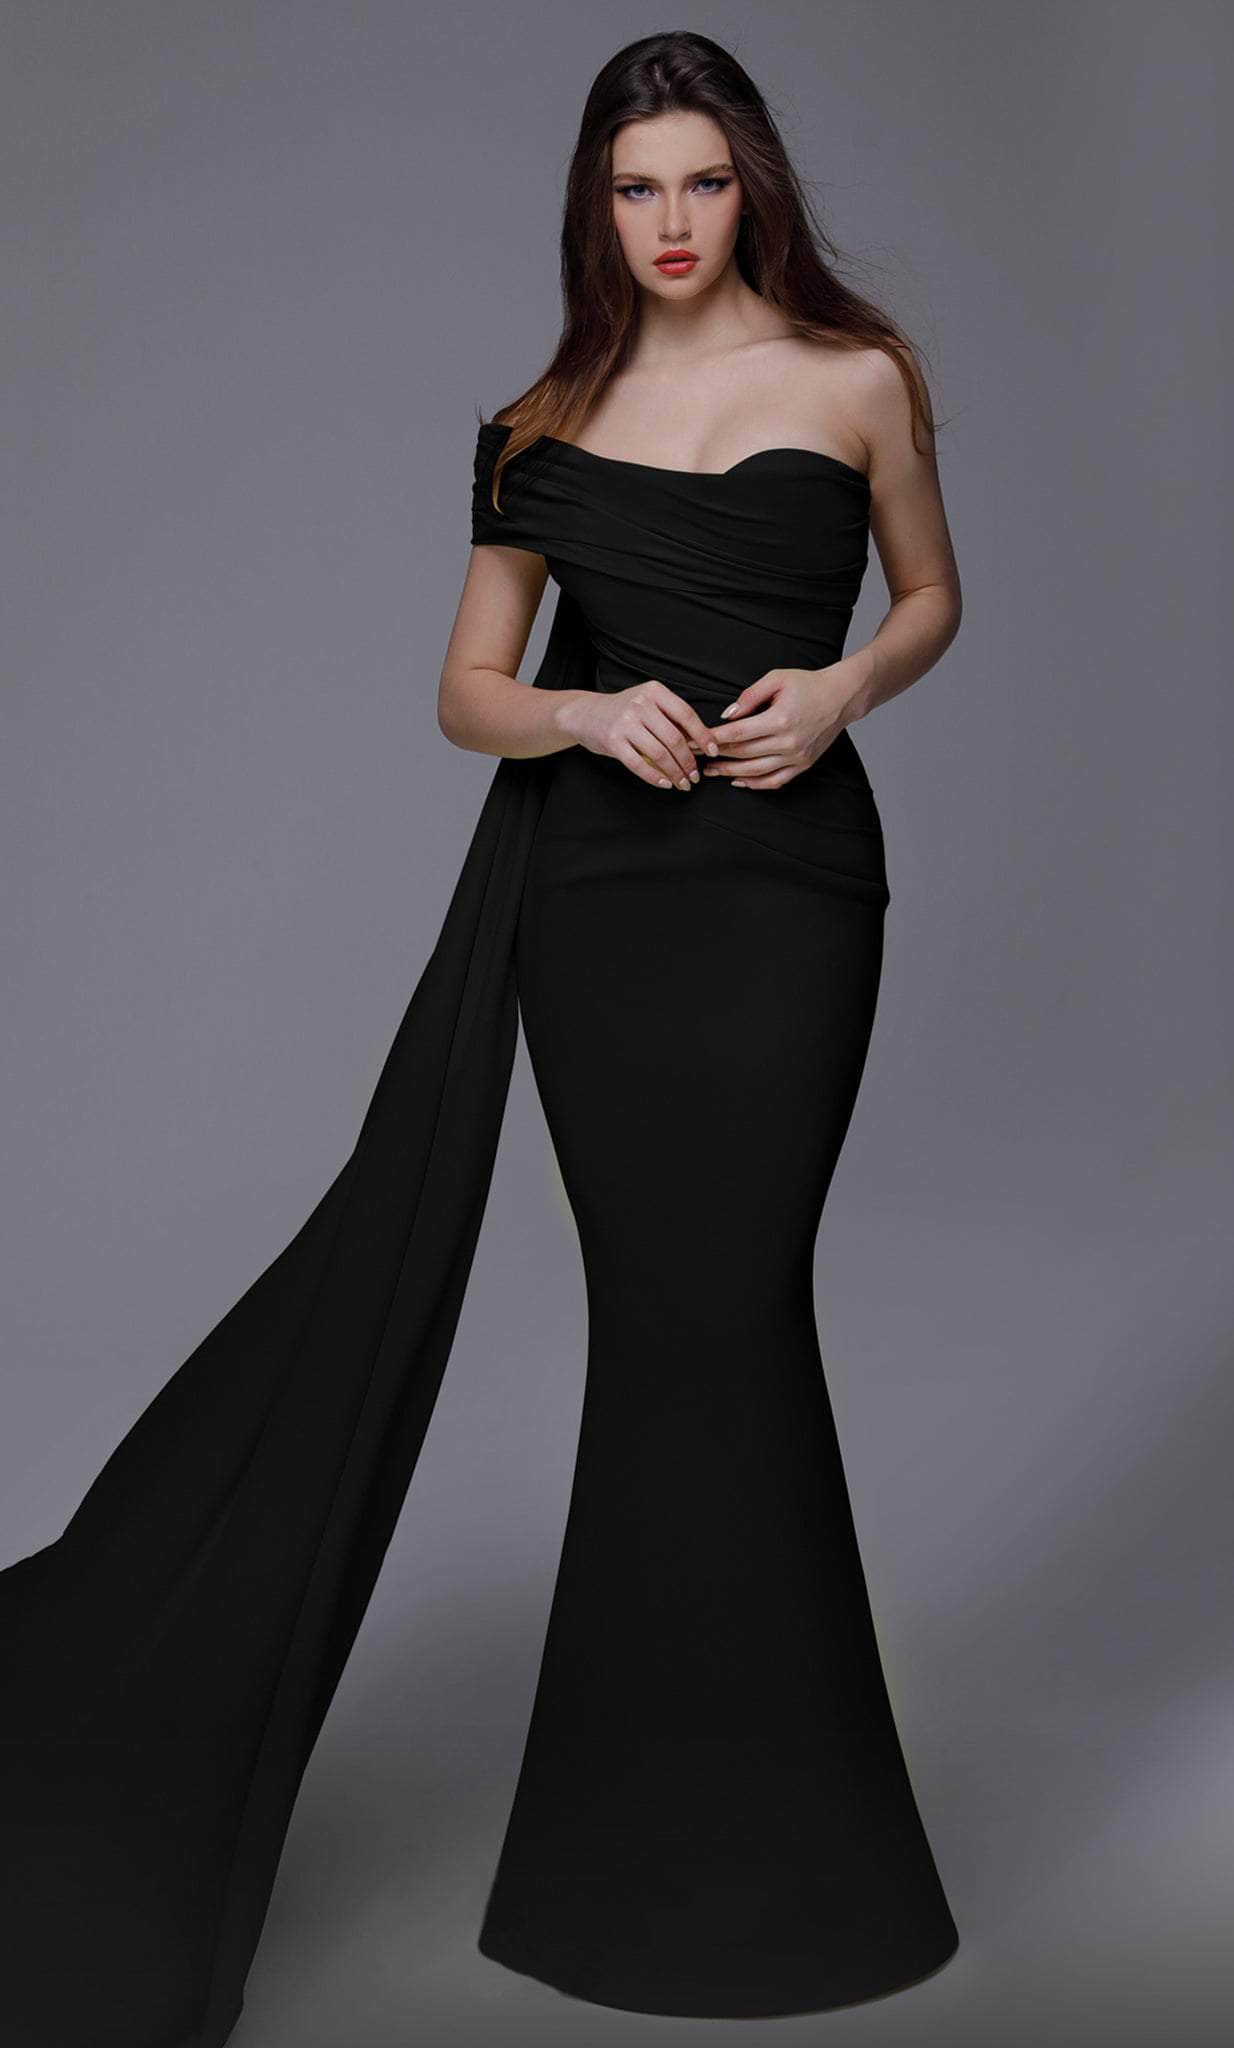 MNM Couture 2718 - Crepe Asymmetrical Evening Gown Special Occasion Dresses 4 / Black